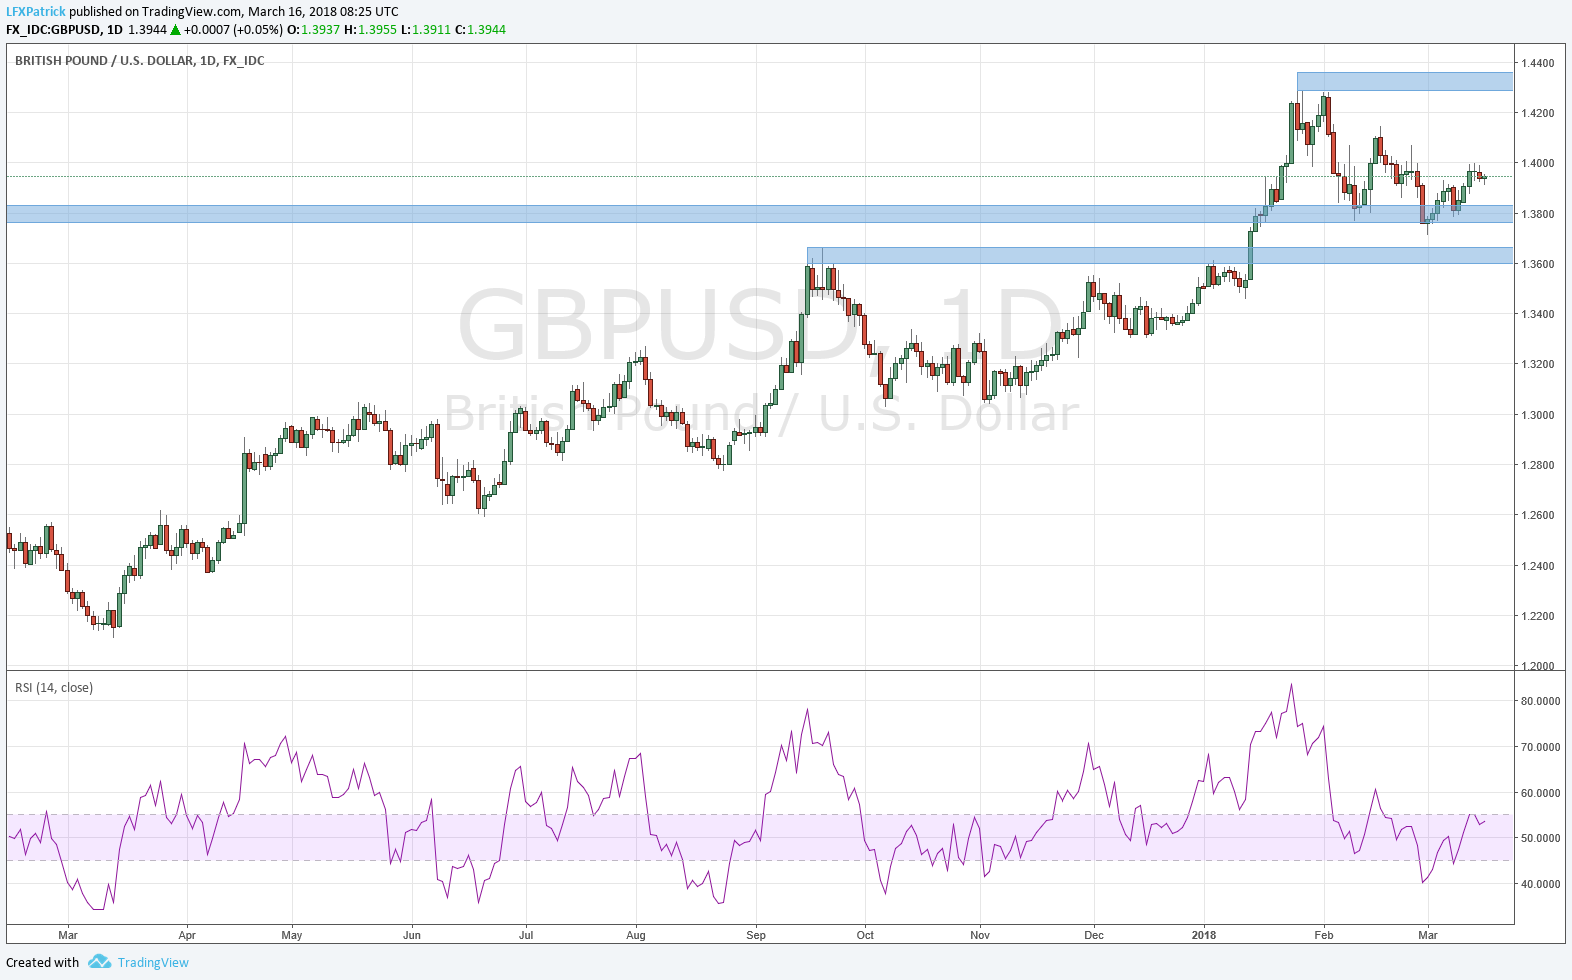 GBP/USD 1 Day Chart